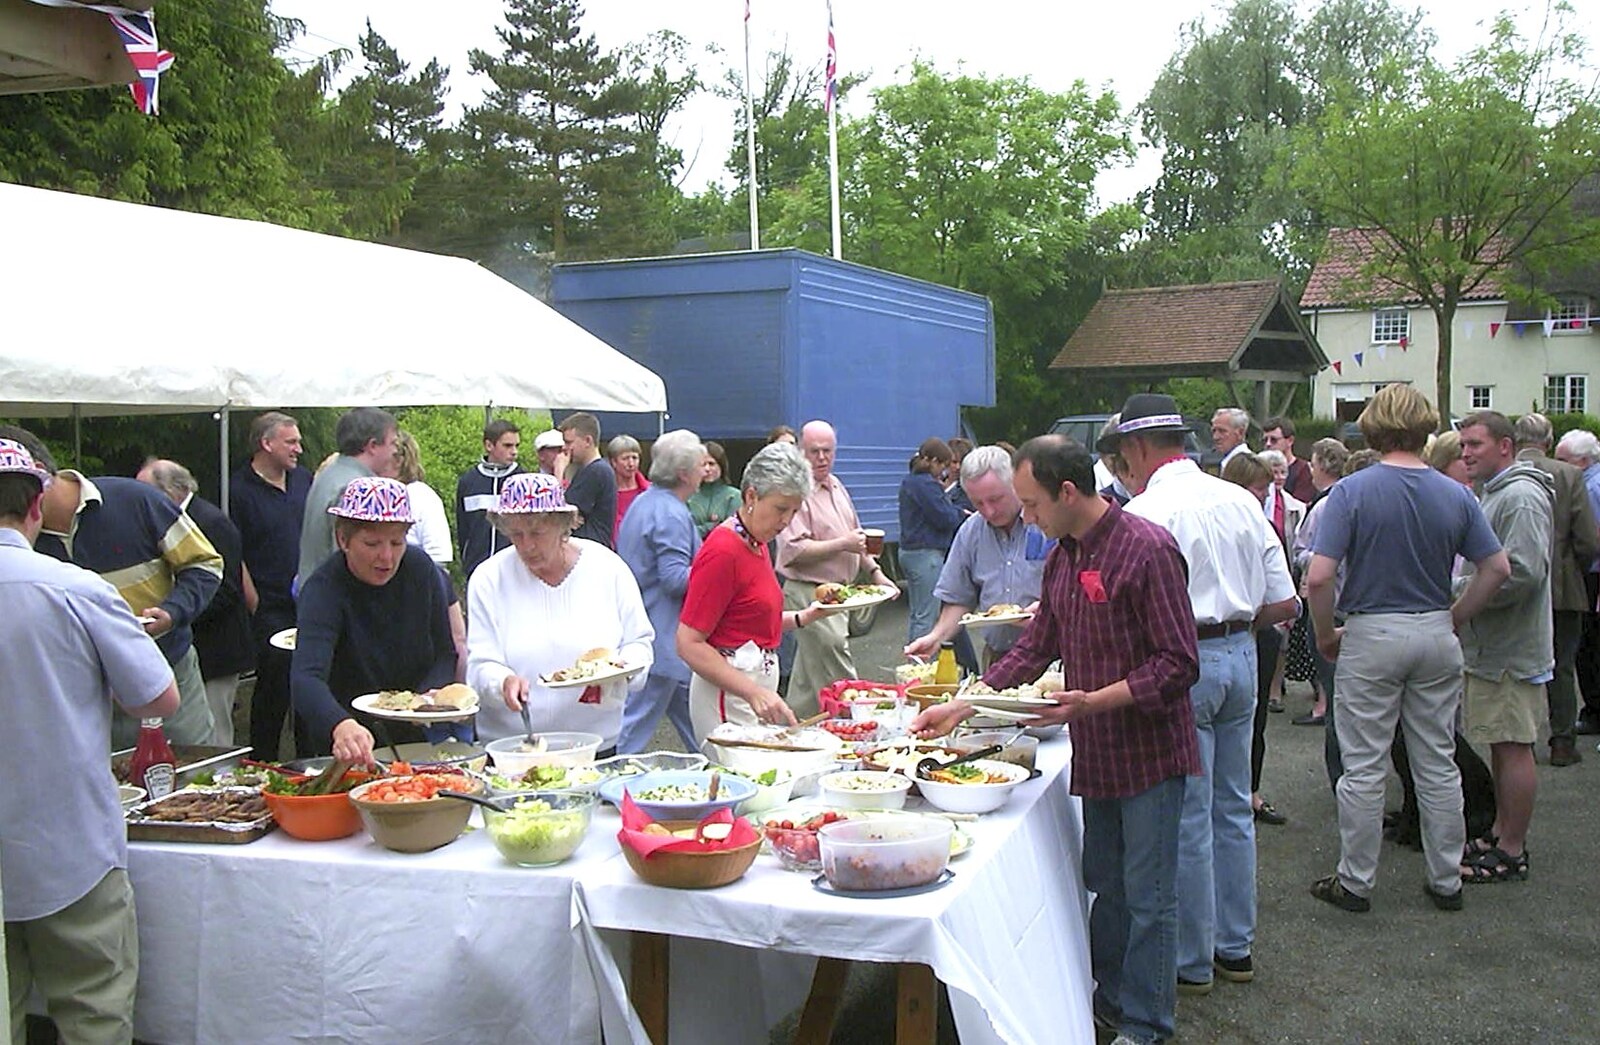 Time for food at Brome Village Hall from Golden Jubilee Celebrations, The Village Hall, Brome, Suffolk - 4th June 2002